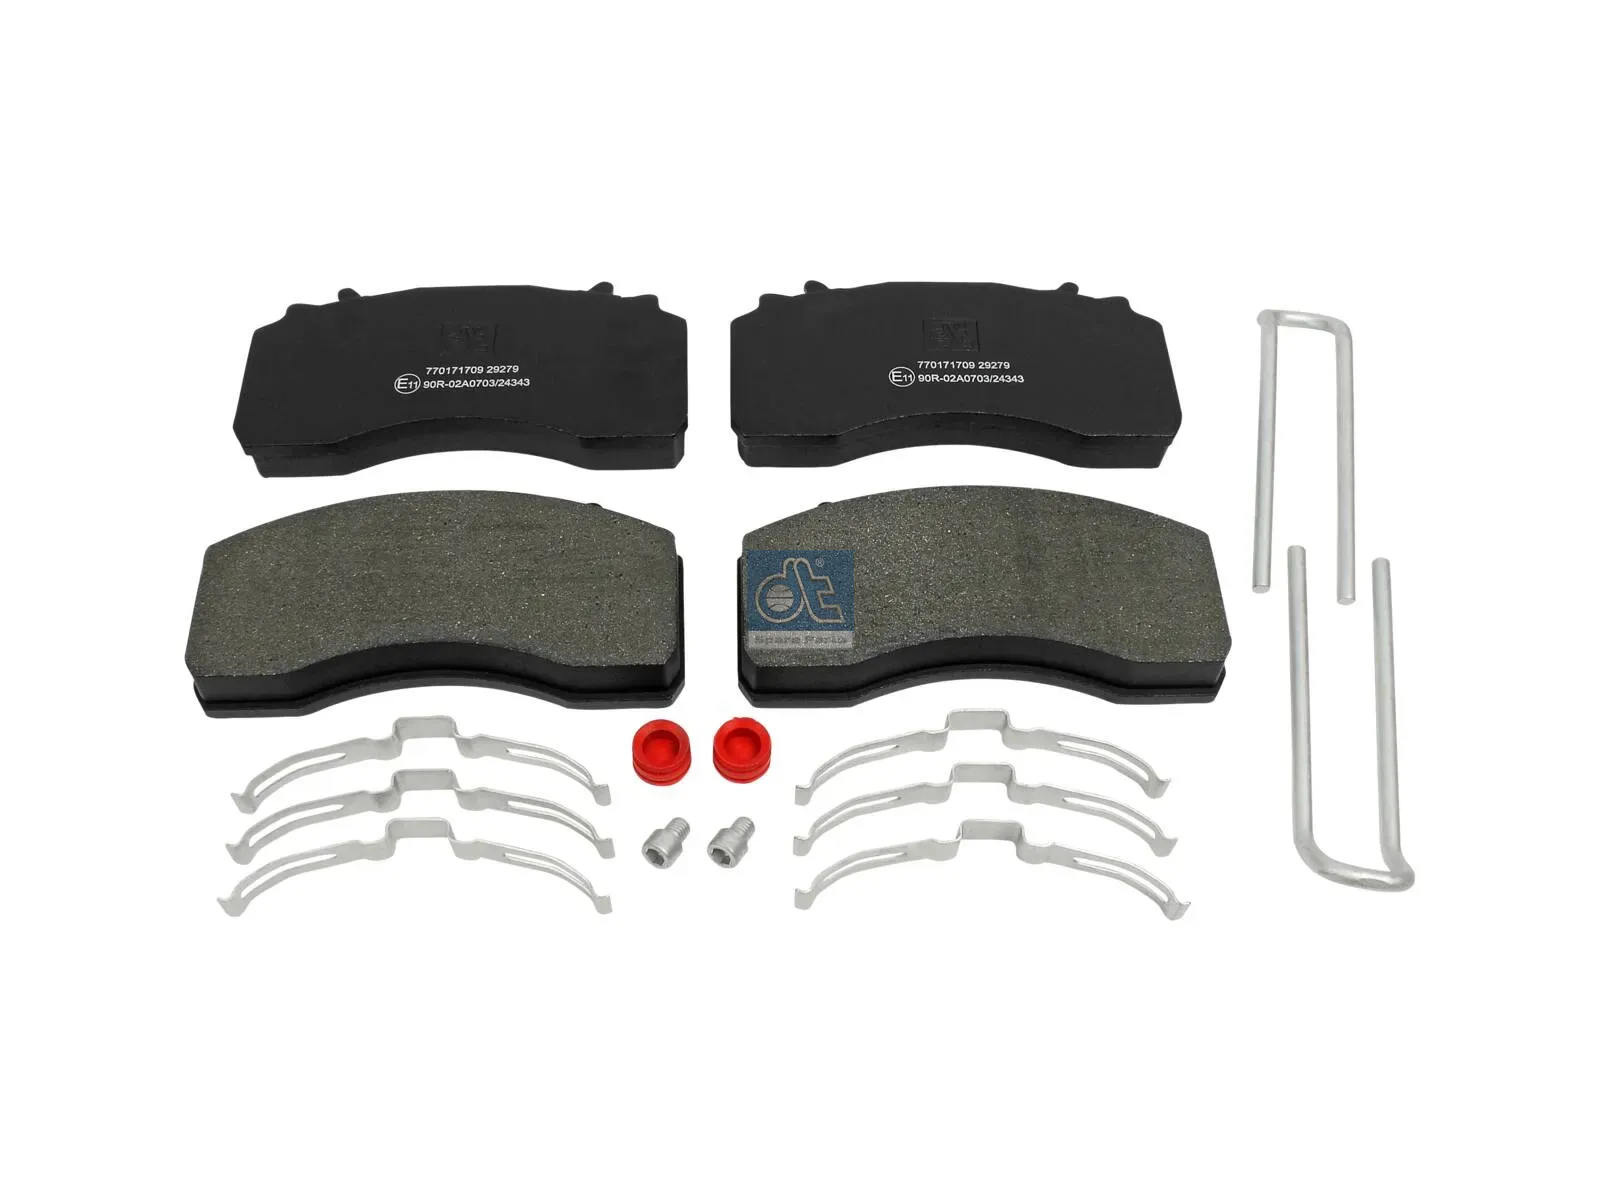 Disc brake pad kit, with accessories